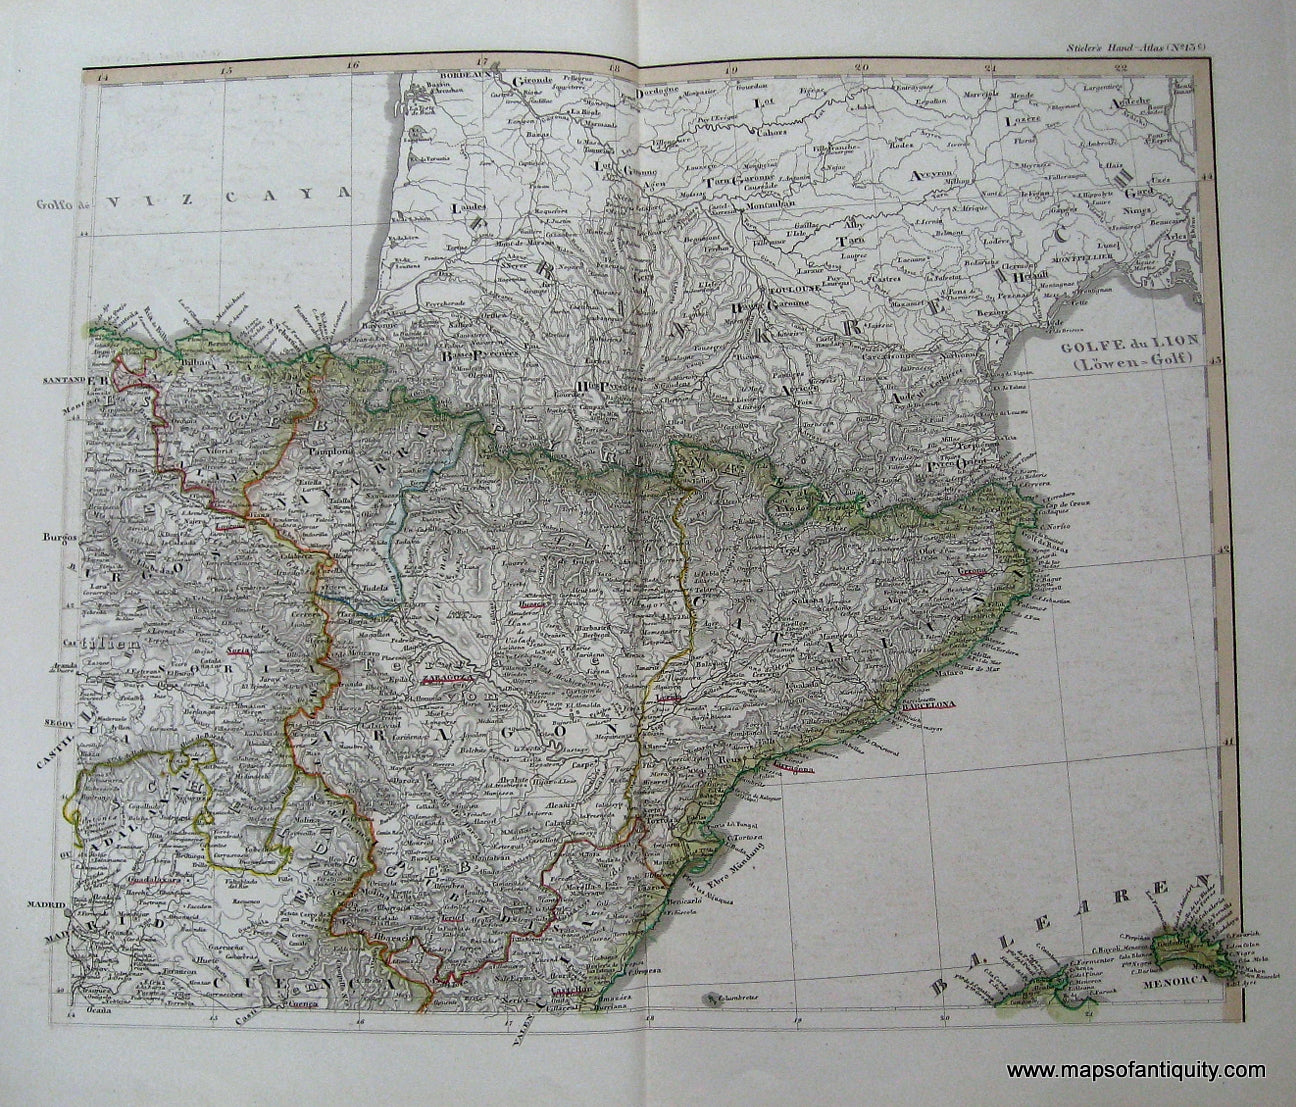 Antique-Hand-Colored-Map-Eintheiling-Spaniens.-Navarra-Catalina-Aragon.--Europe-Spain-and-Portugal-circa-1852-Stieler-Maps-Of-Antiquity